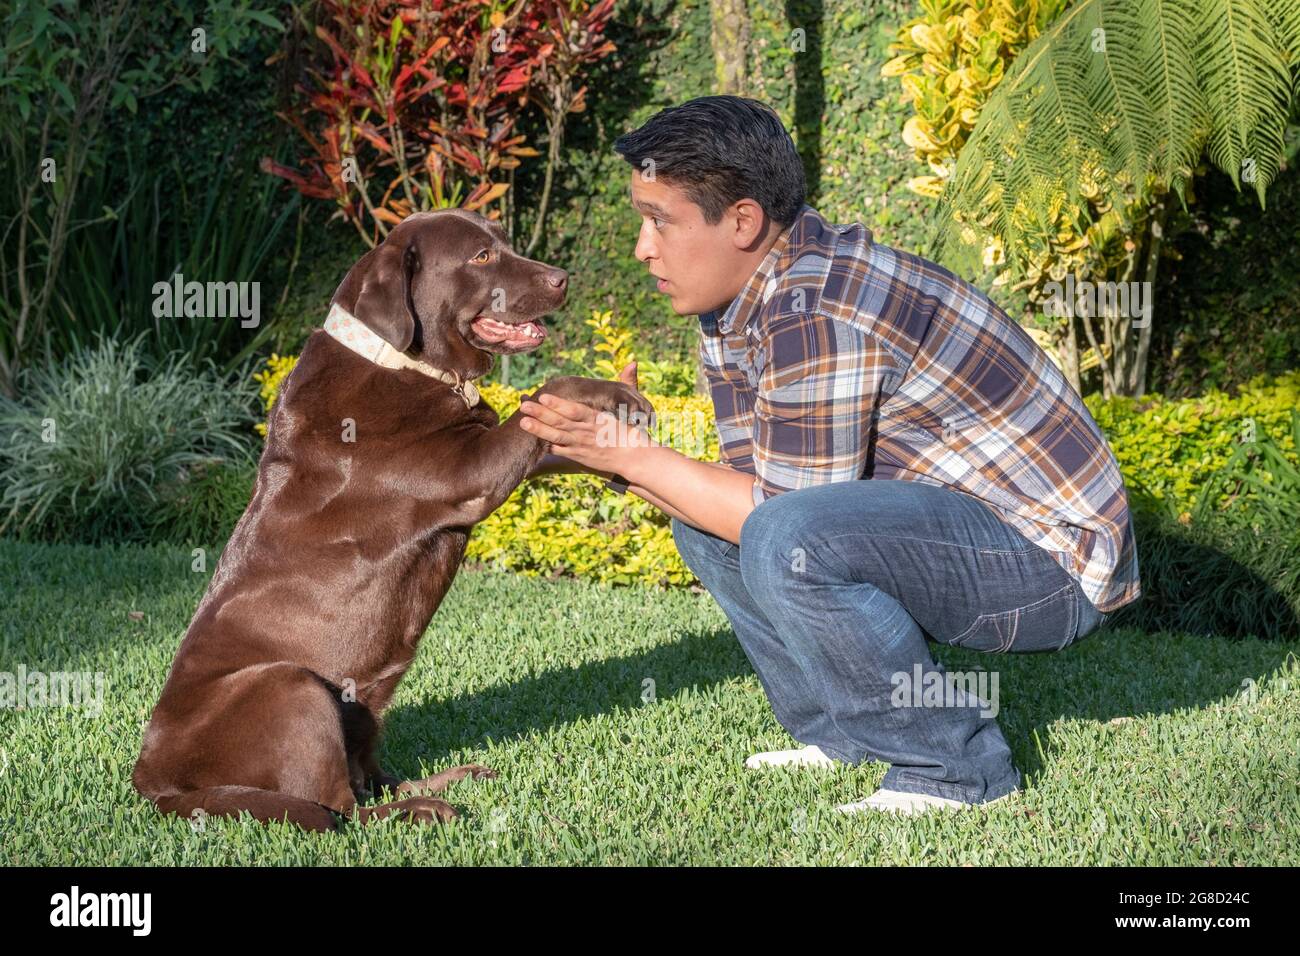 Young man during obedience training with his dog Stock Photo